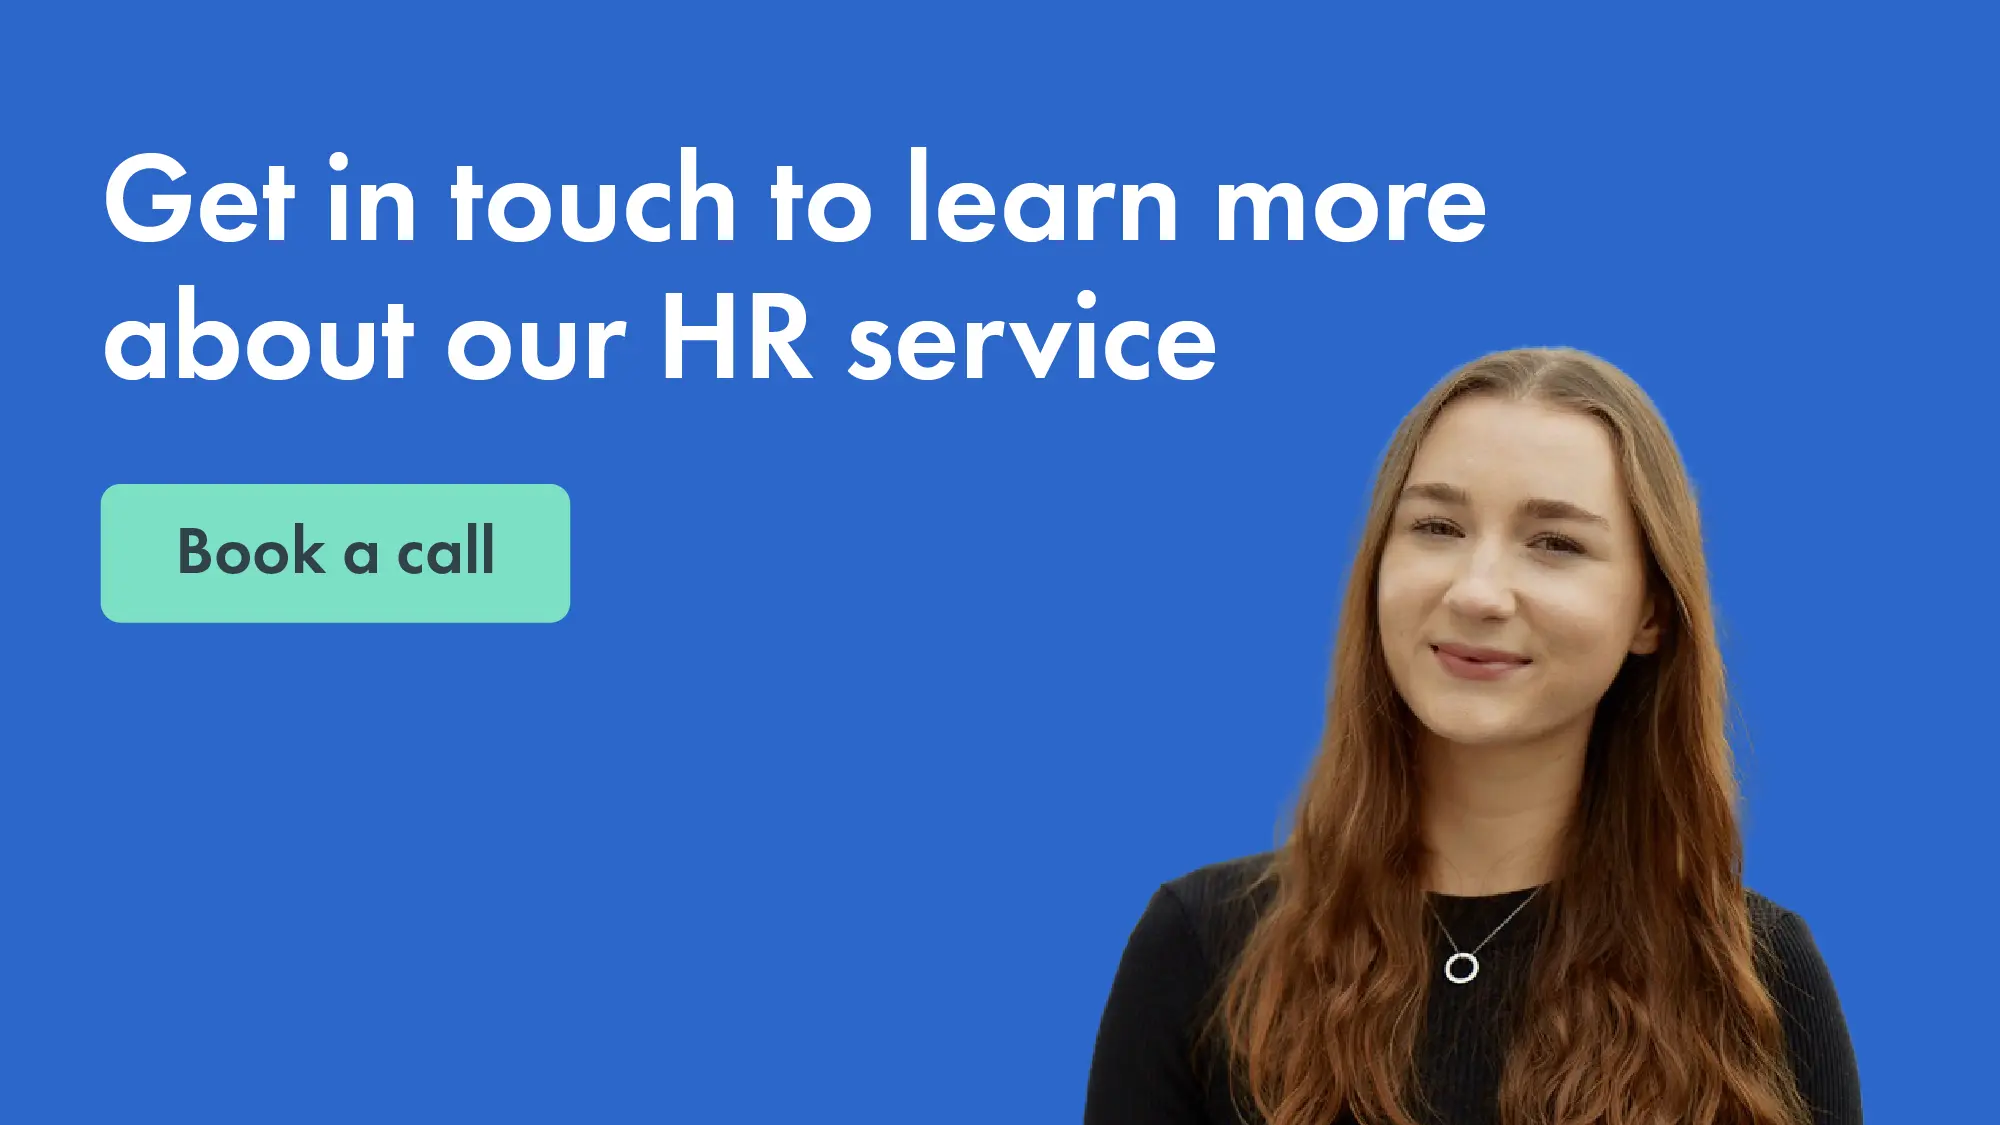 Click here to book a call about our HR Advice service